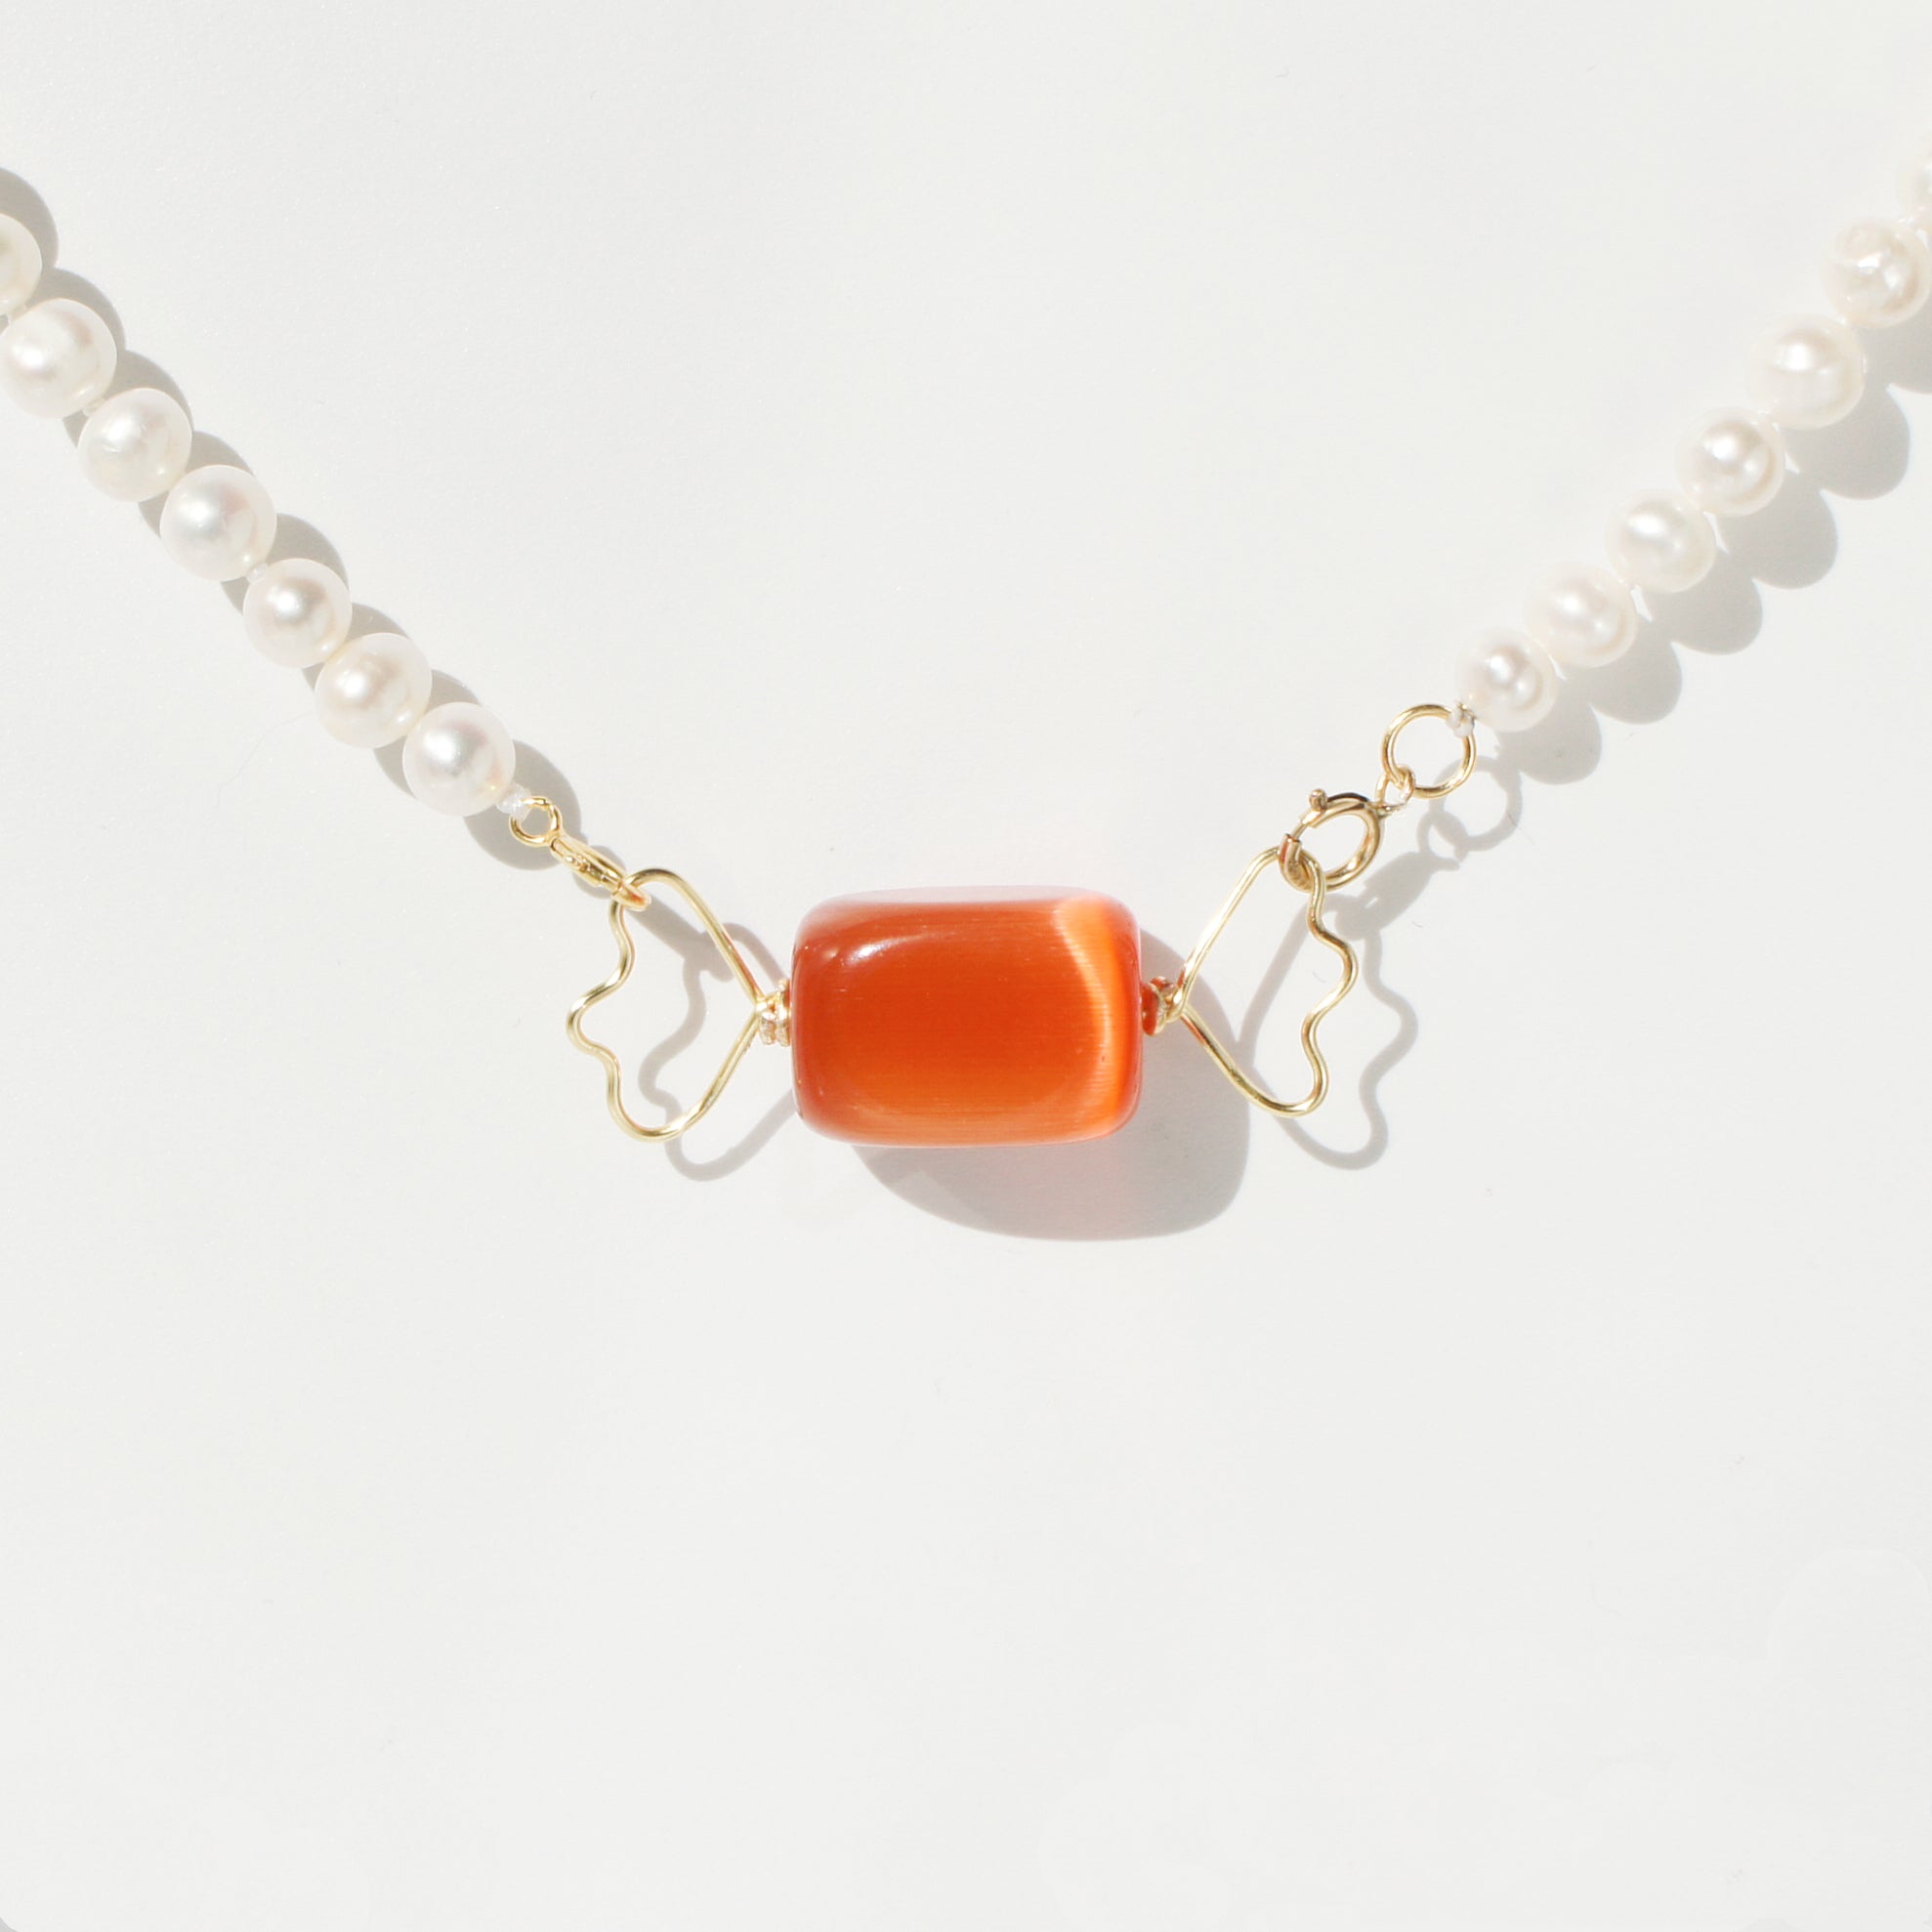 Sugar Sweet Candy and Freshwater Pearl Necklace with Detachable Pendant